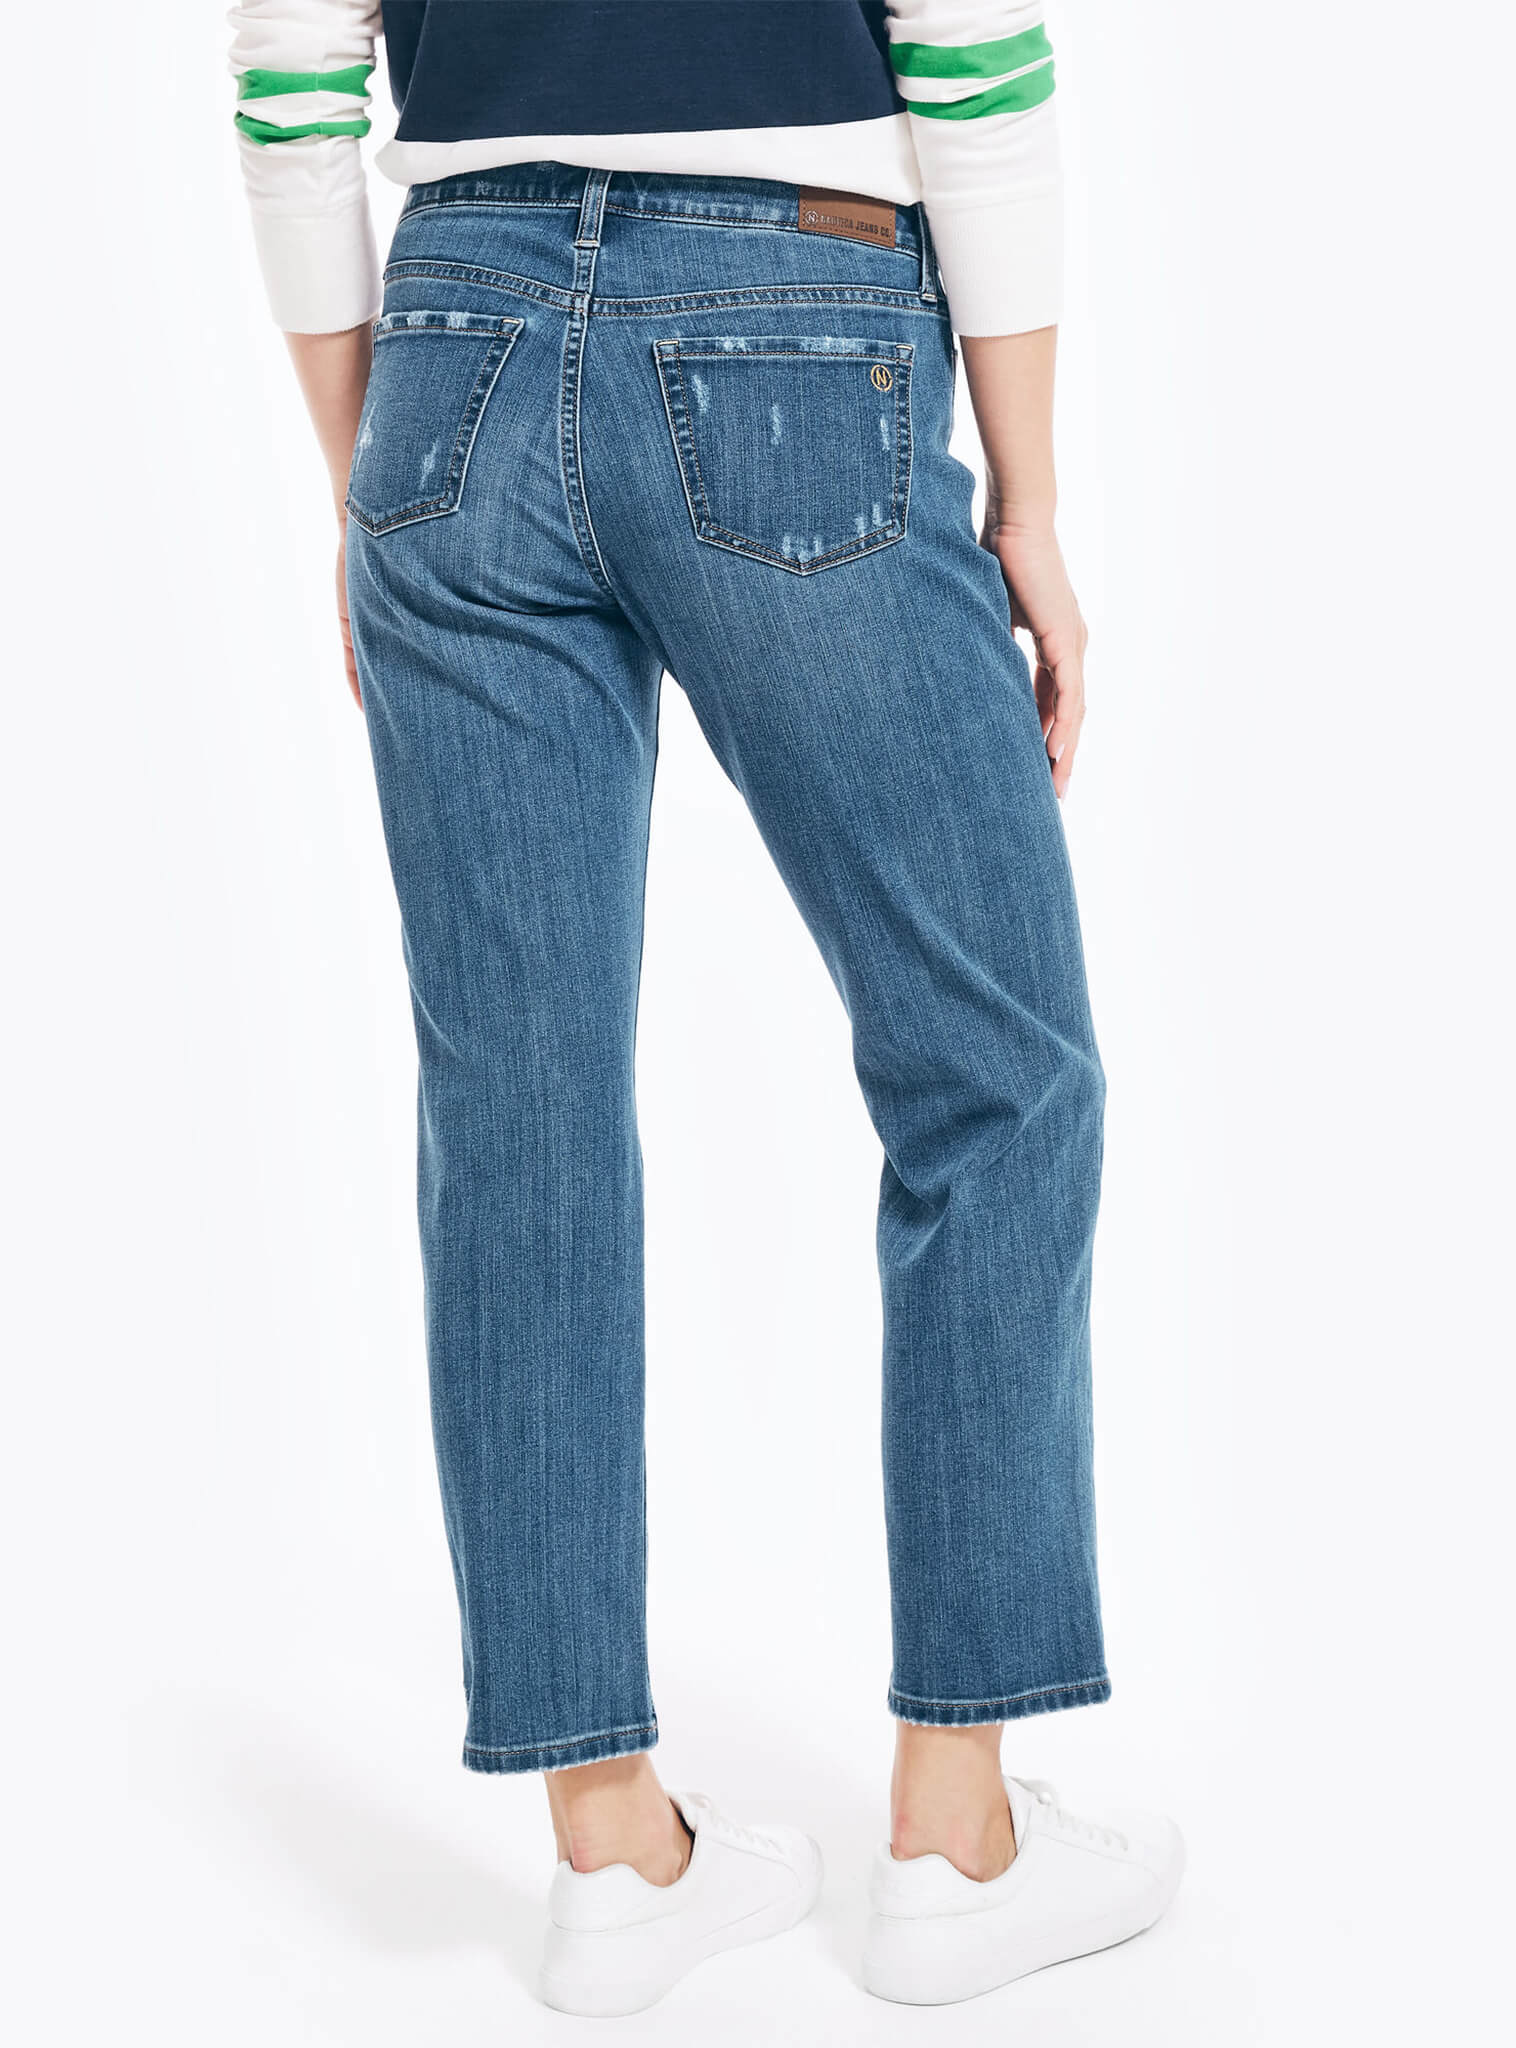 Jeans Tiro Medio Recto Sustaibly Crafted Mujer